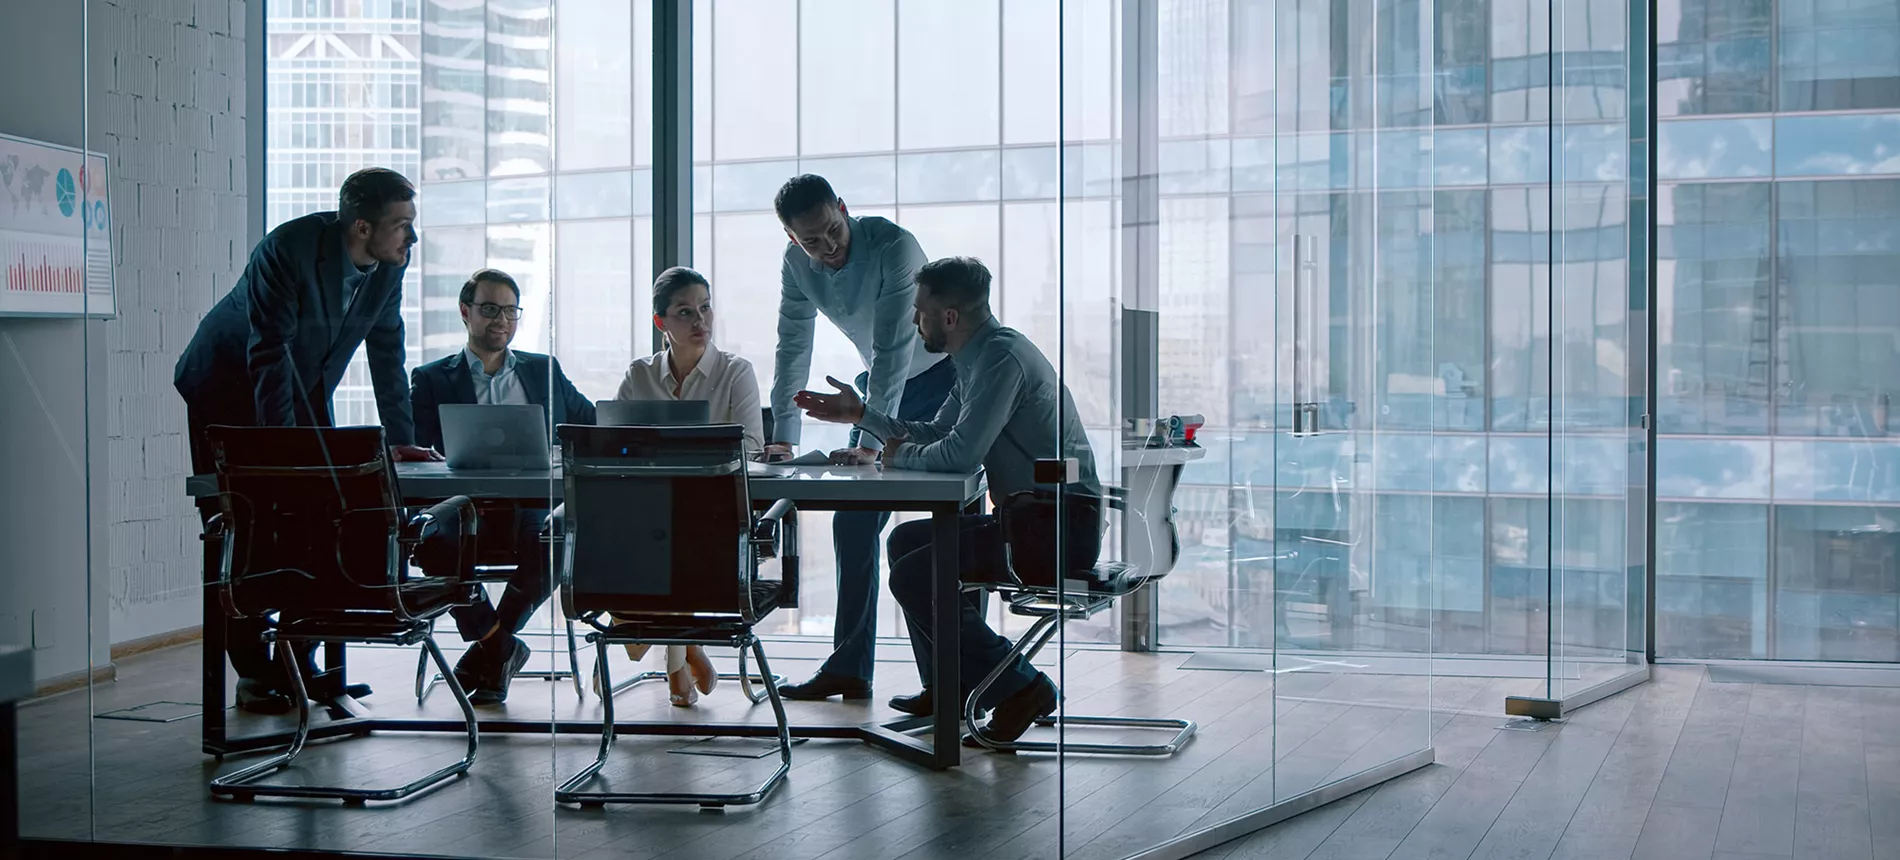 five persons in a meeting in a glass office